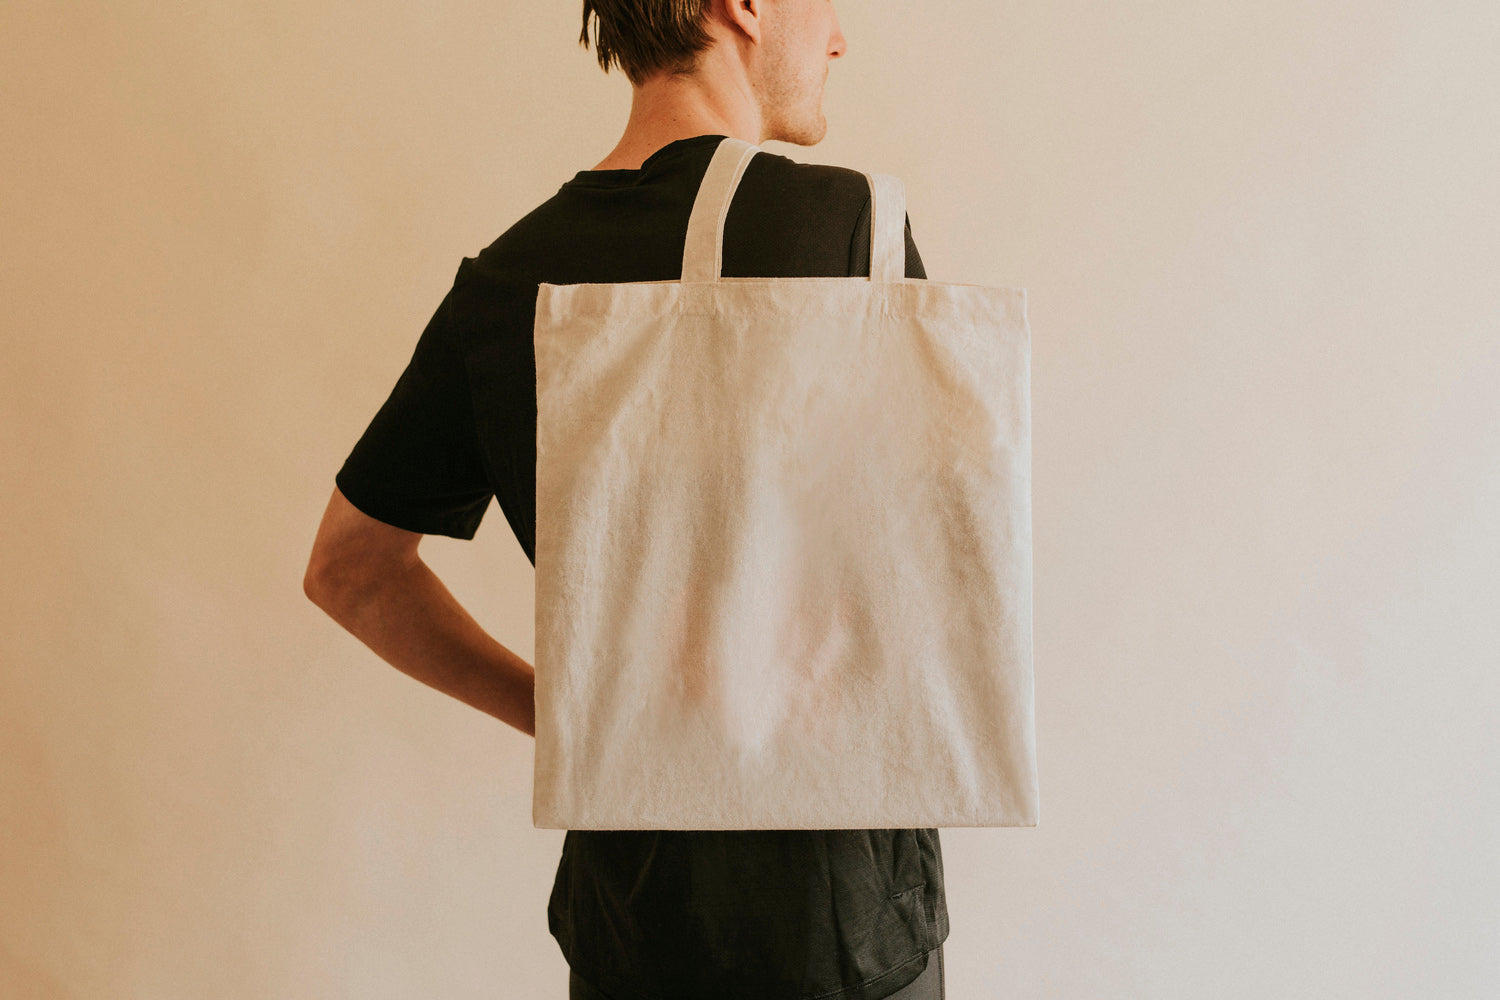 How to Measure a Tote Bag - Ultimate Guide